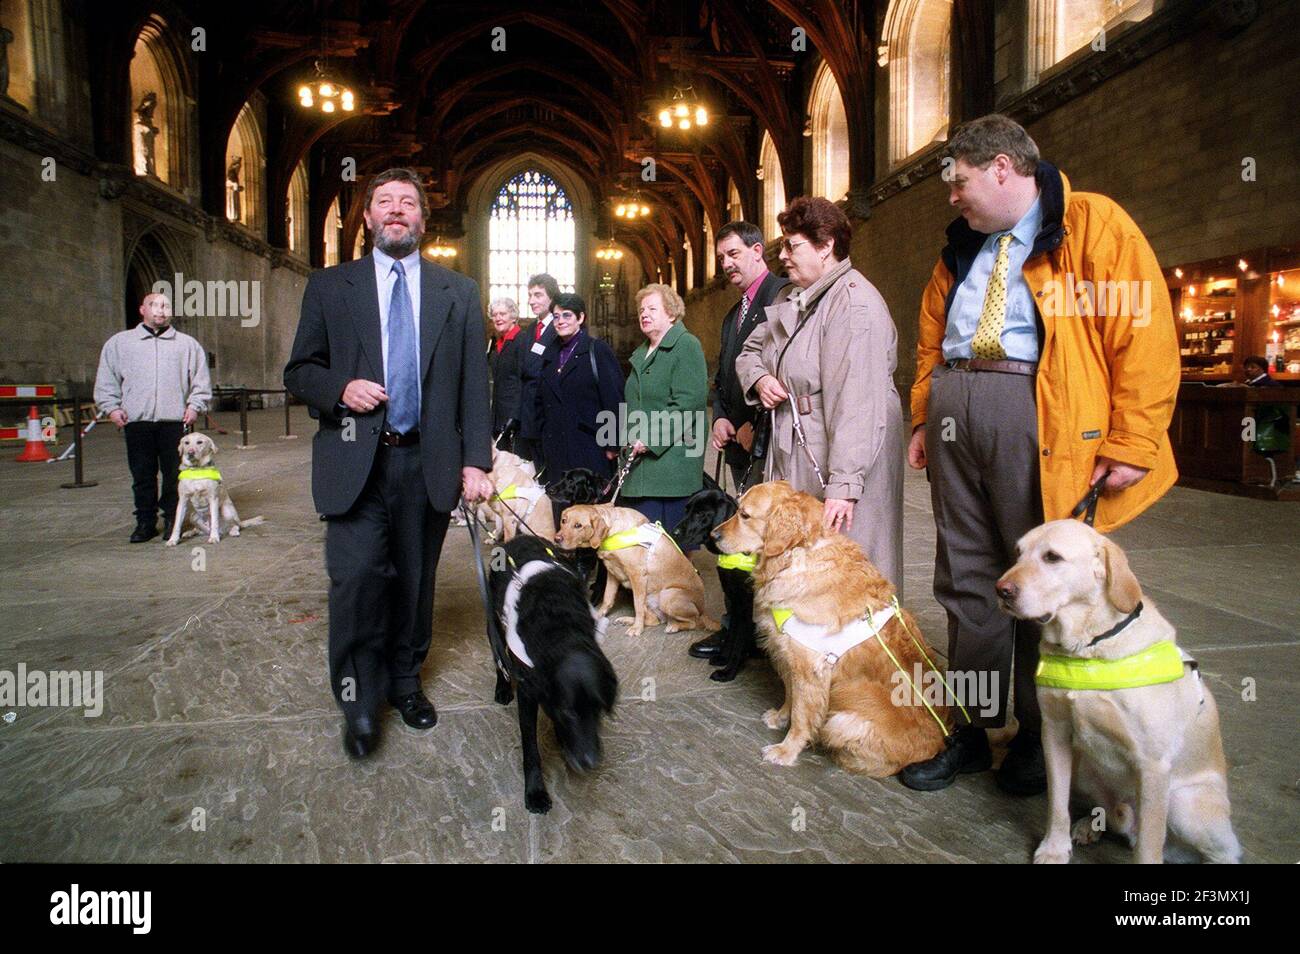 David Blunkett Guide Dogs For the Blind Association March 2001The guide dogs for the blind assocition held a reception at the House of Commons  to celebrate the introduction of section 37 of the disability discrimination act 1995 which requires licensed taxi drivers to carry guide dogs in their car  David Blunkett MP and Education secretary with his guide dog Lucy seen here meeting some of the association members and their dogs in the House of Commons Stock Photo